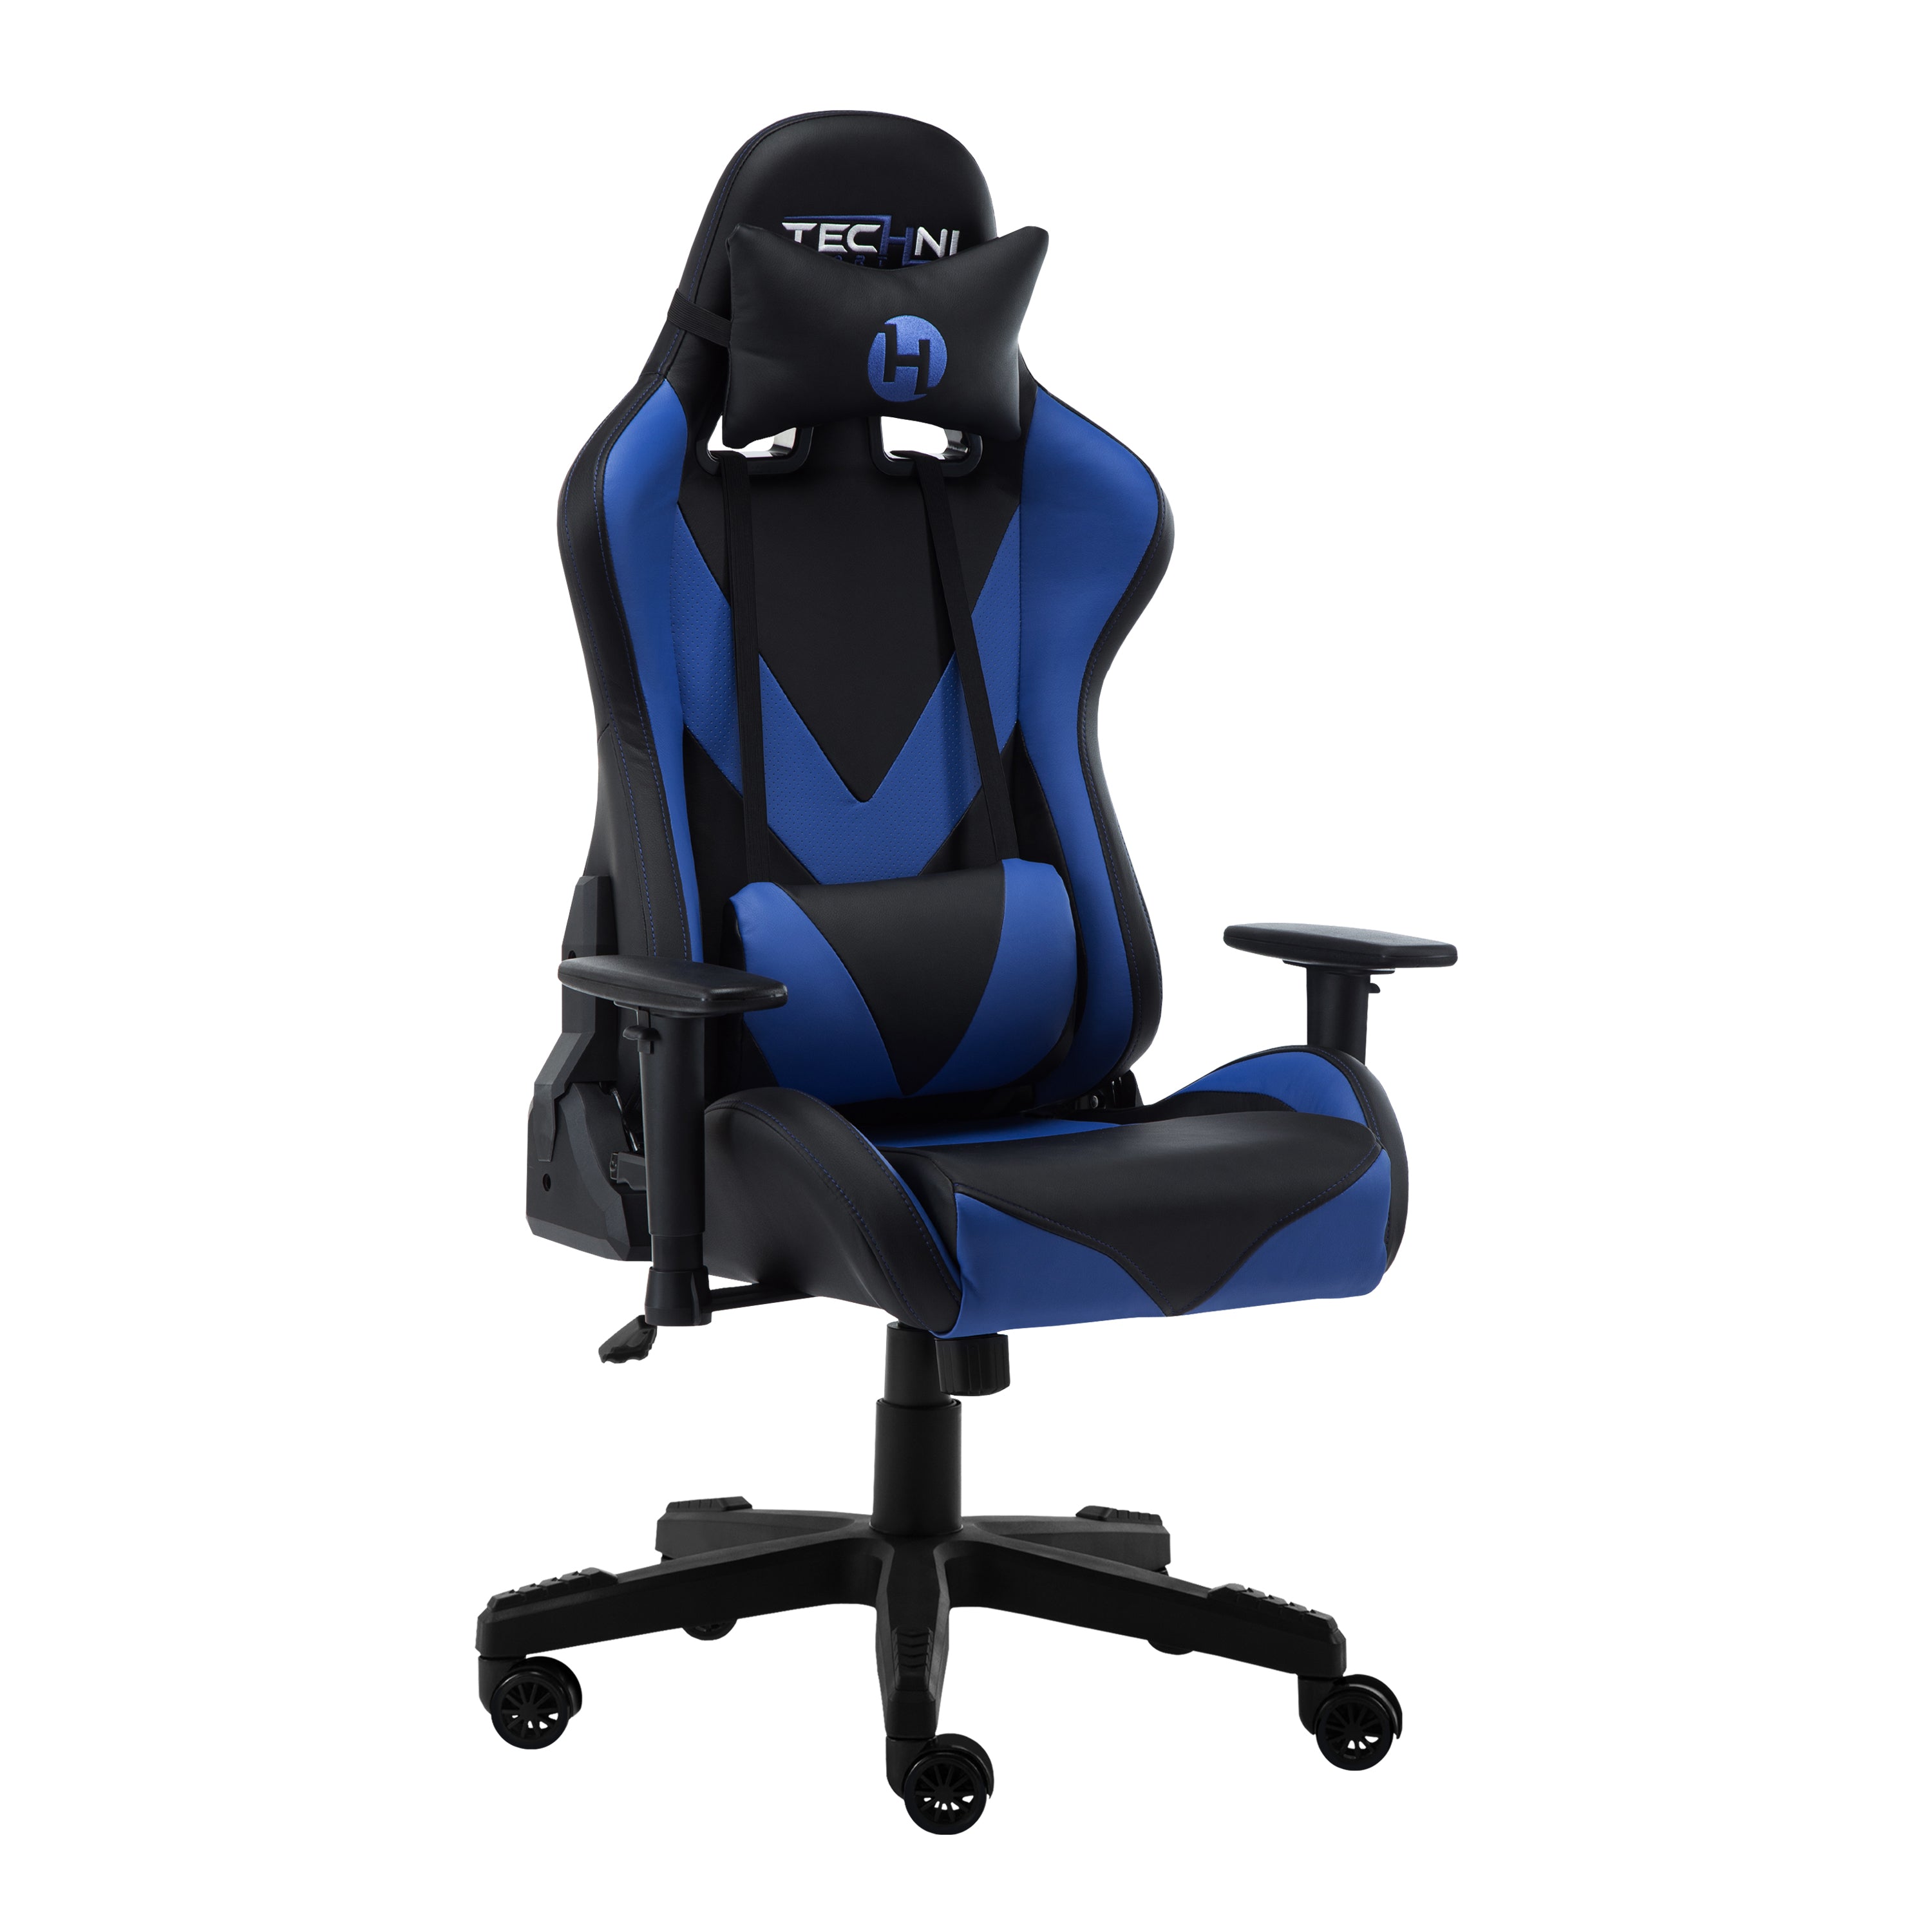 FTPGAMECH Technical Pro Gaming Chair with Built-In Bluetooth